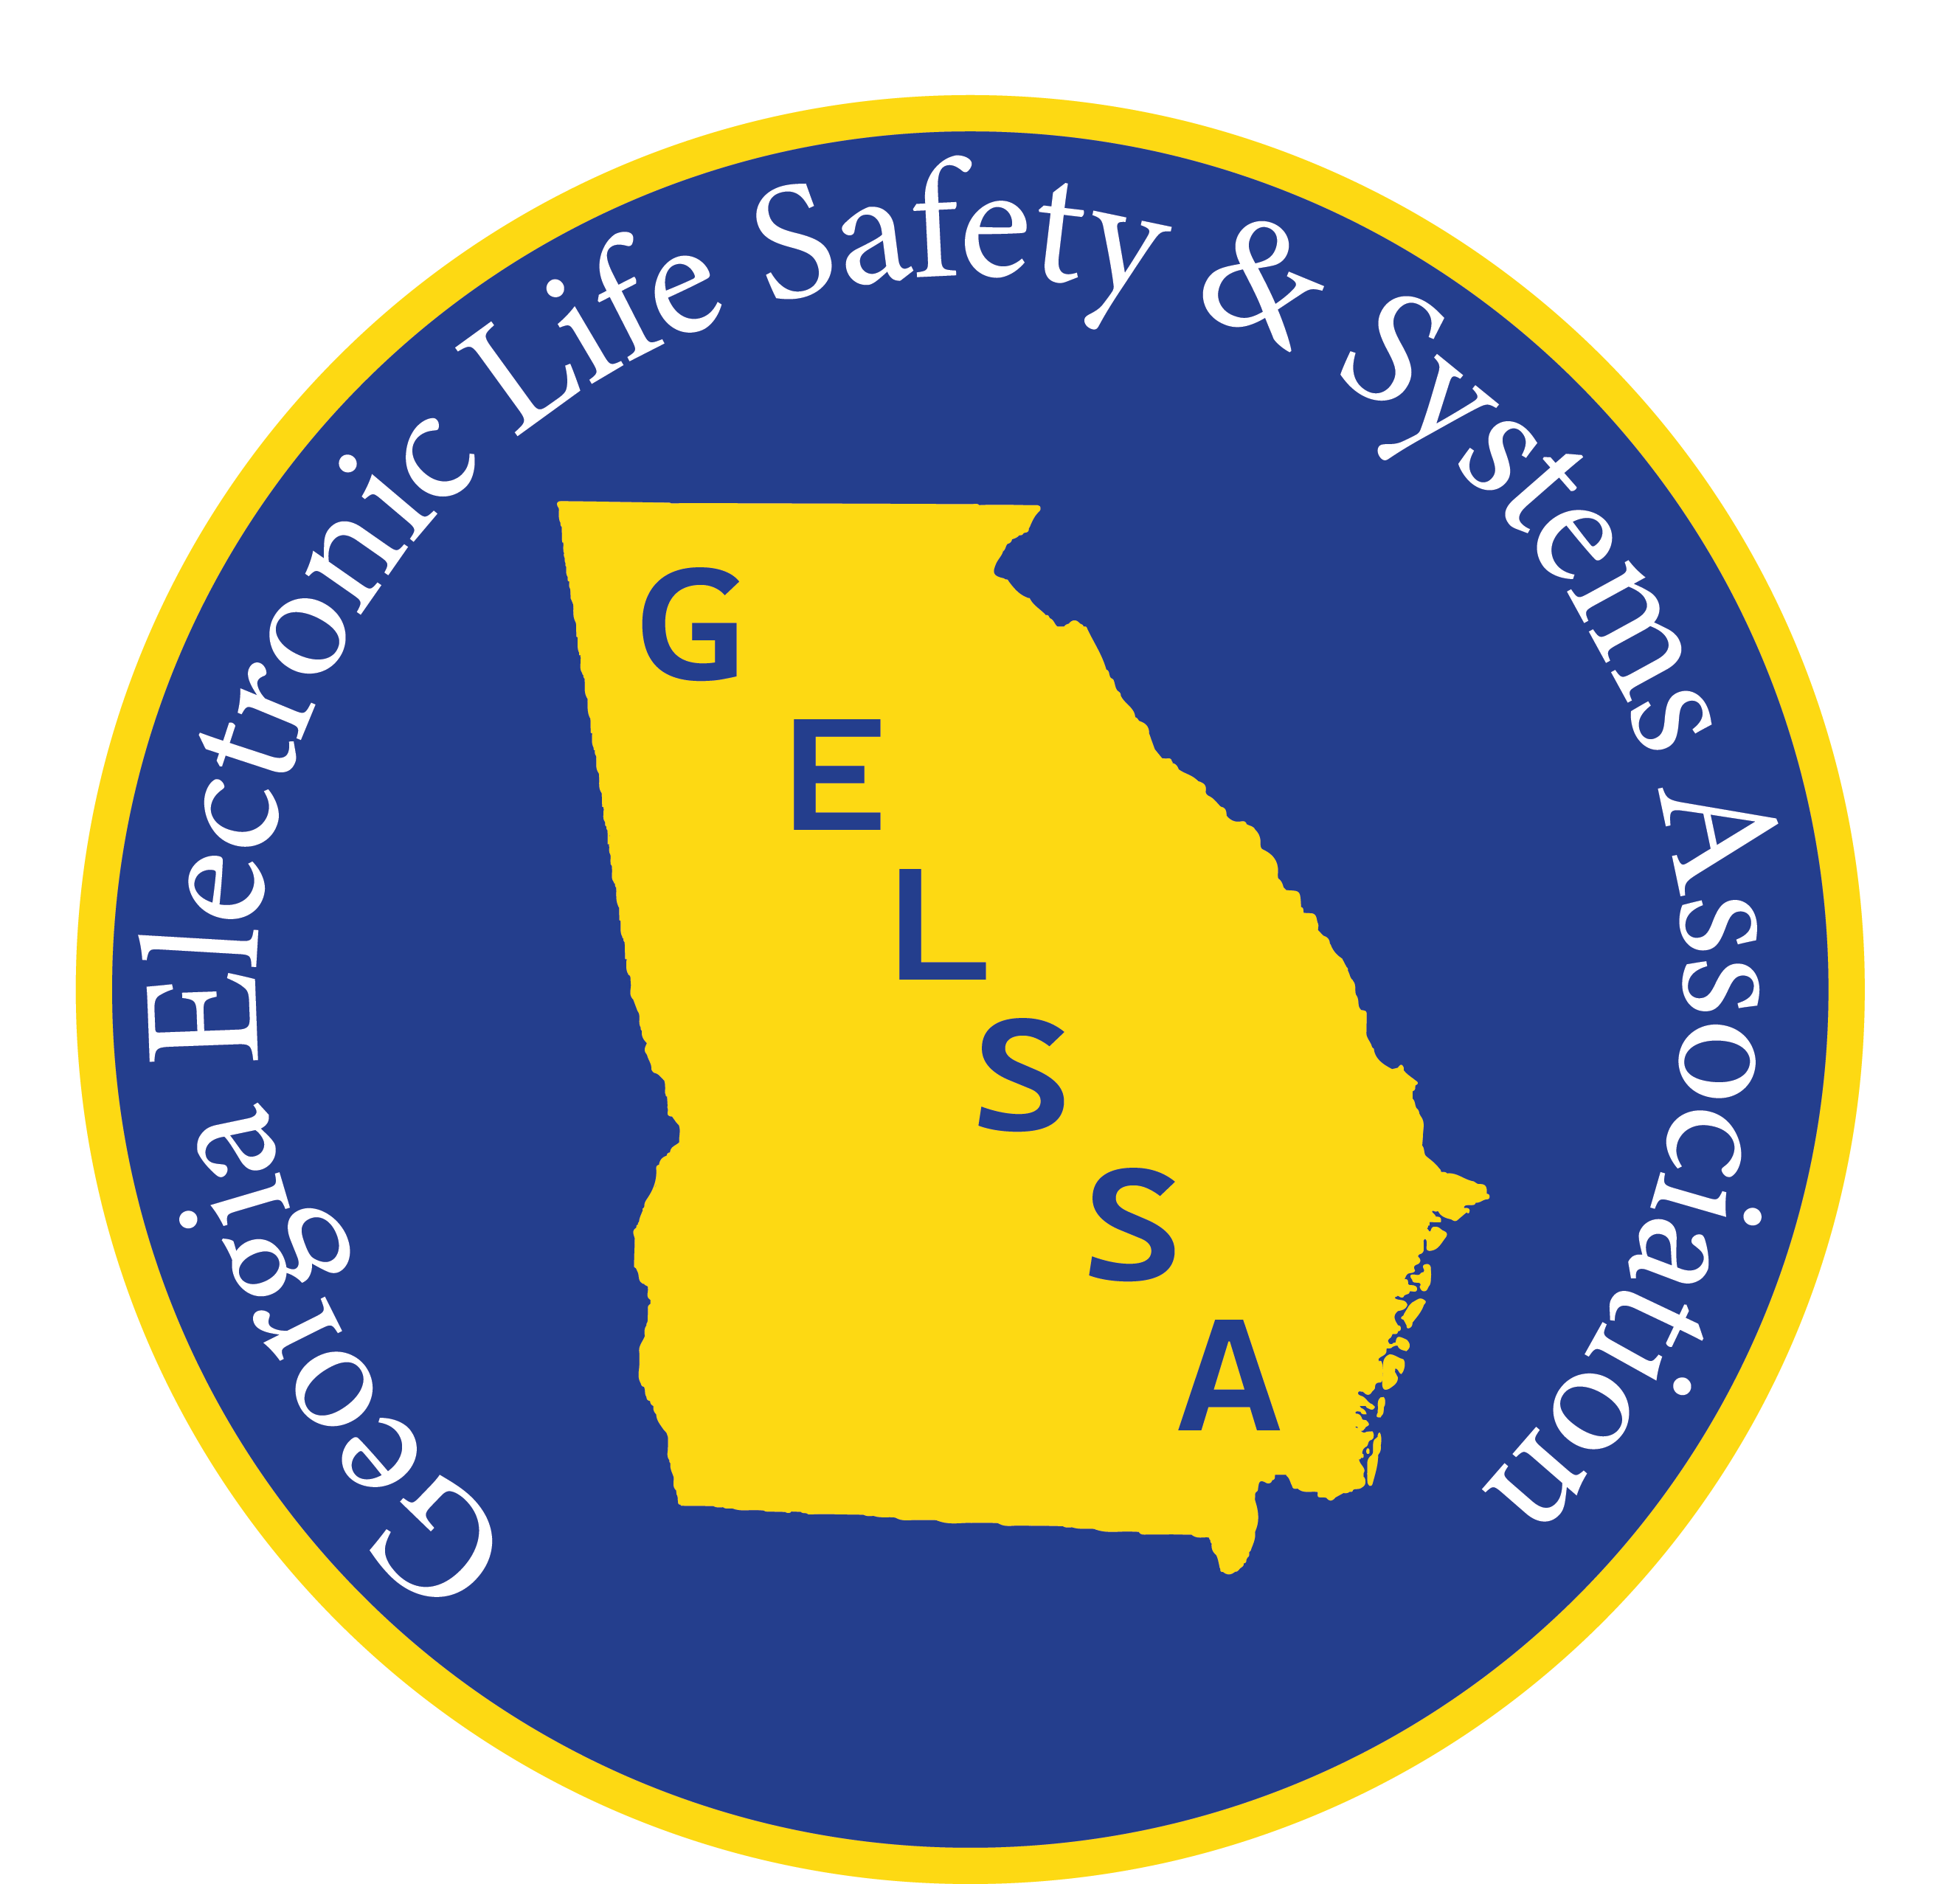 Georgia Electronic Life Safety & Systems Association